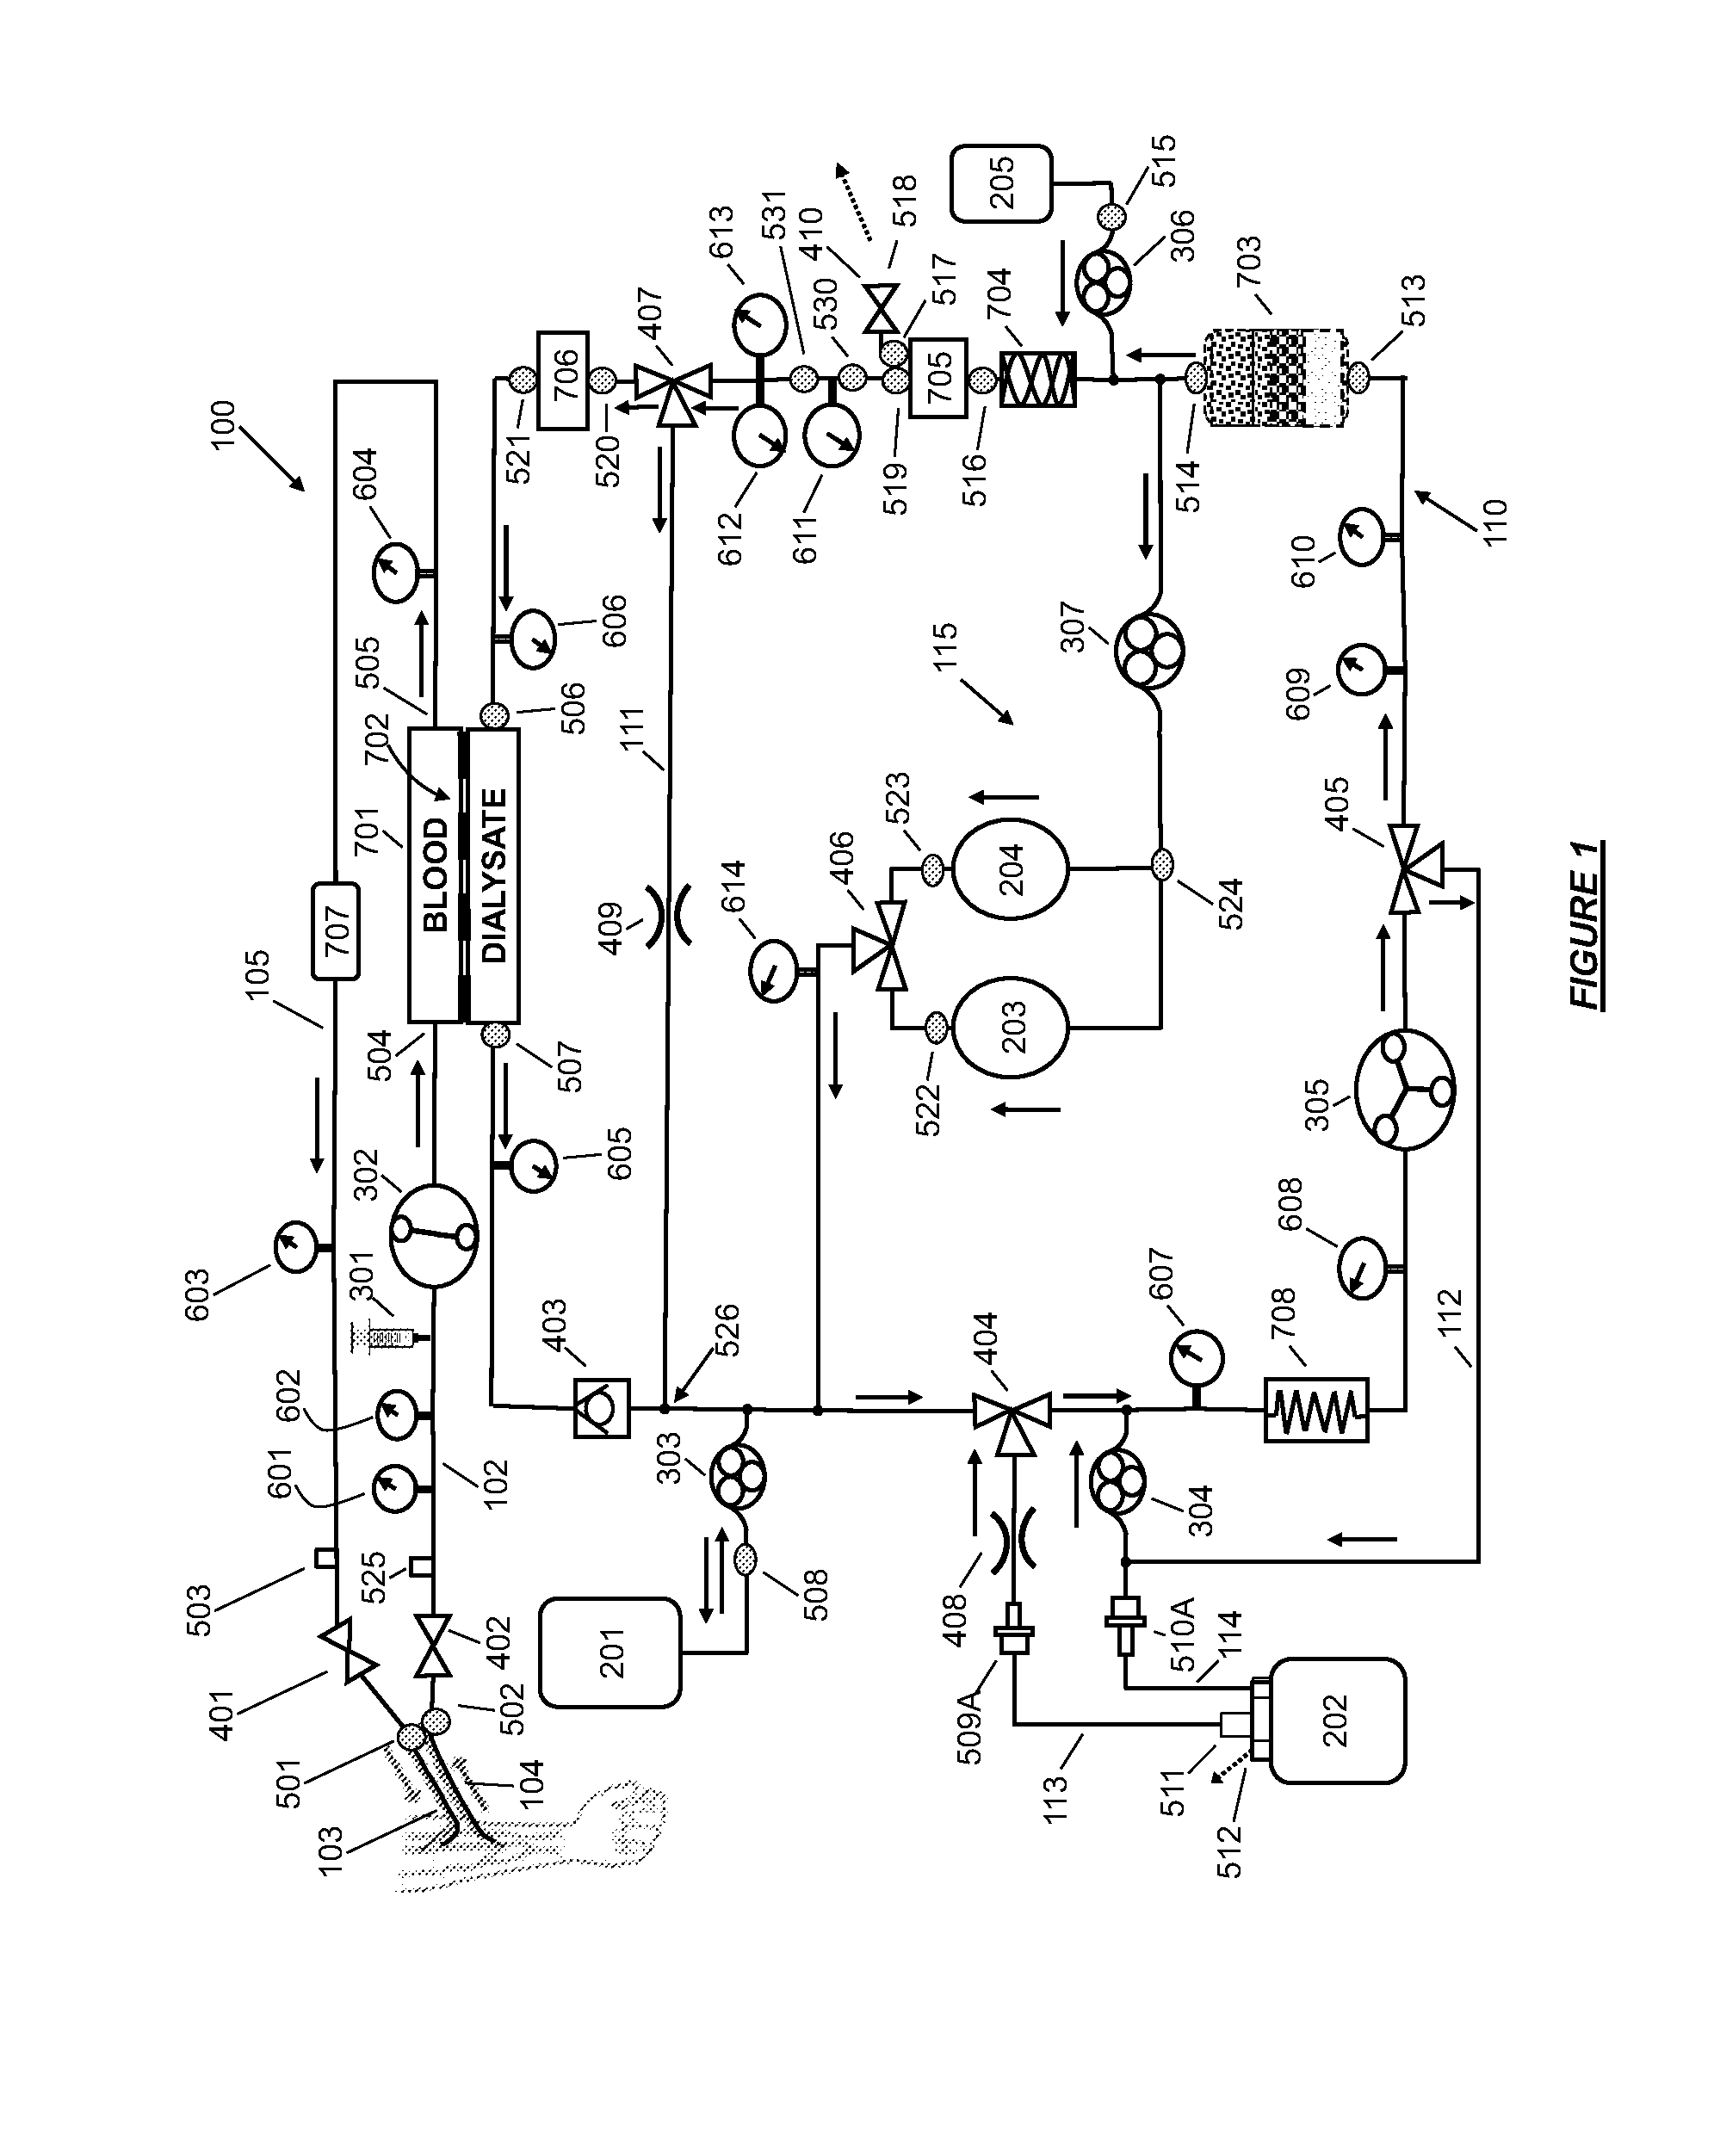 Degassing module for a controlled compliant flow path